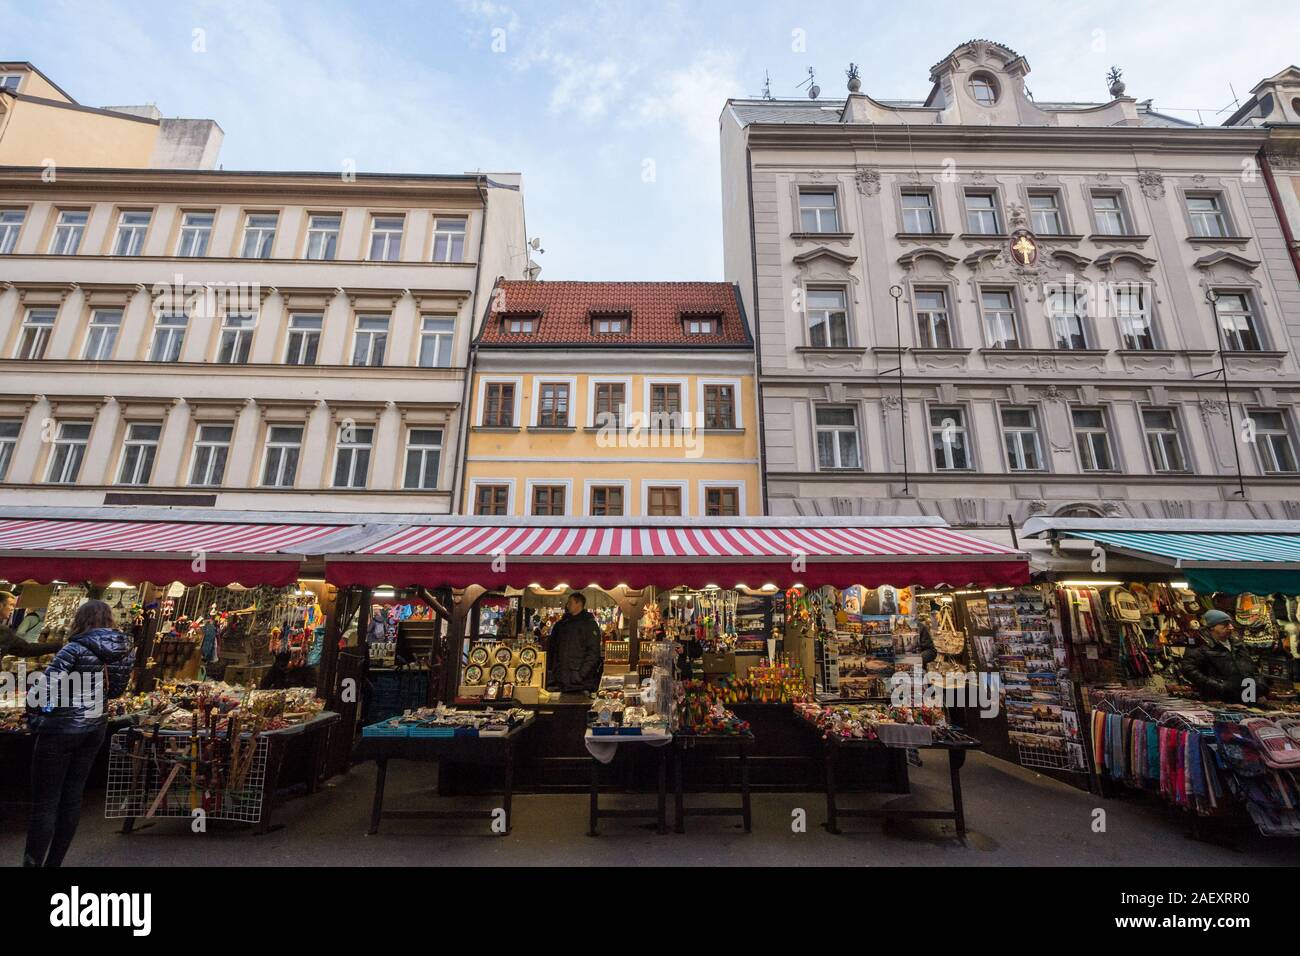 PRAGUE, CZECHIA - NOVEMBER 3, 2019: Halevske Trziste market in Prague, with a focus on stands selling souvenirs and arts items to tourists. It is the Stock Photo